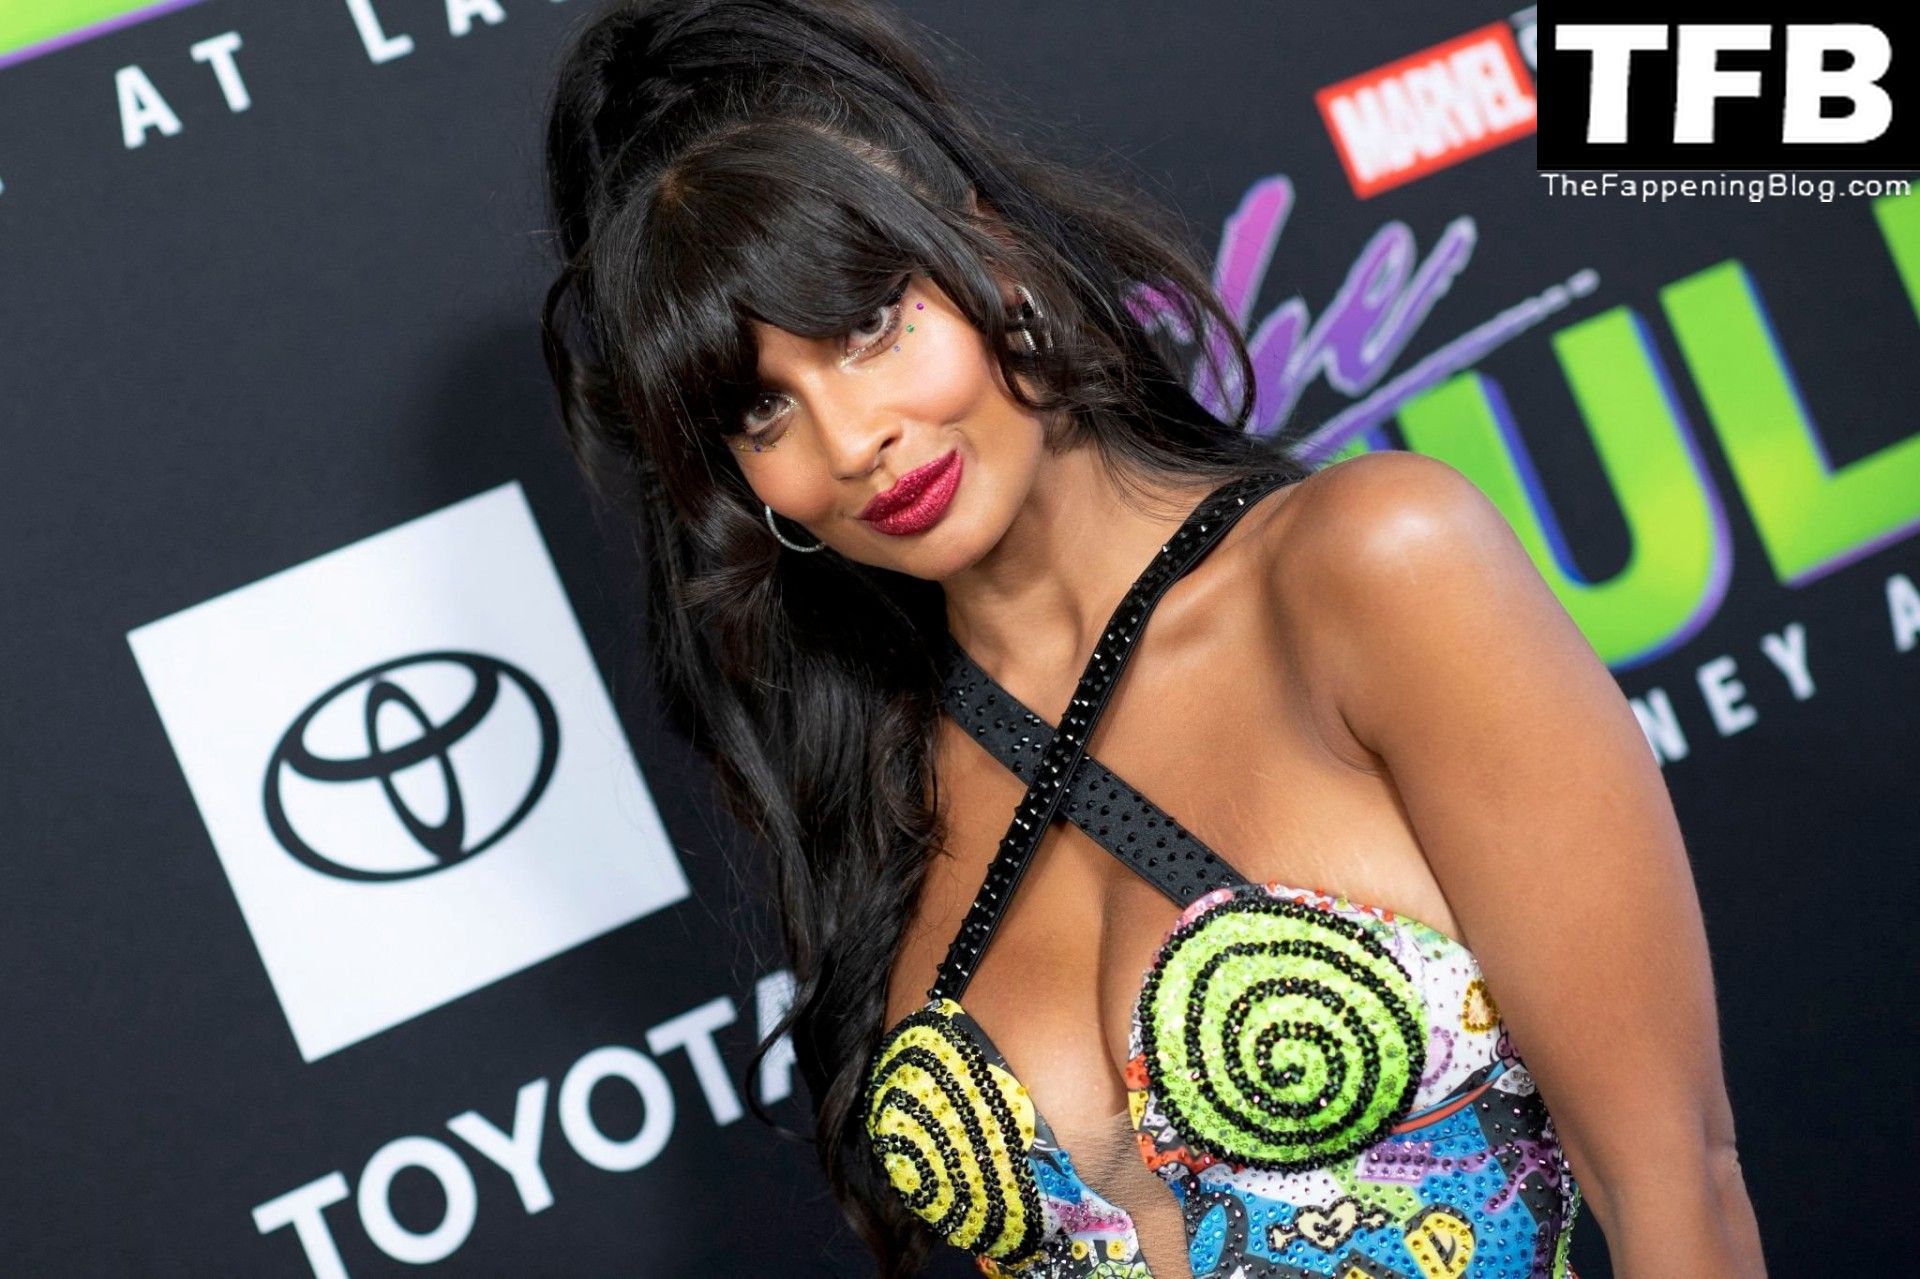 Jameela Jamil Sexy The Fappening Blog 48 - Jameela Jamil Flaunts Her Big Tits at the Premiere of Disney+’s “She Hulk: Attorney at Law” in LA (53 Photos)